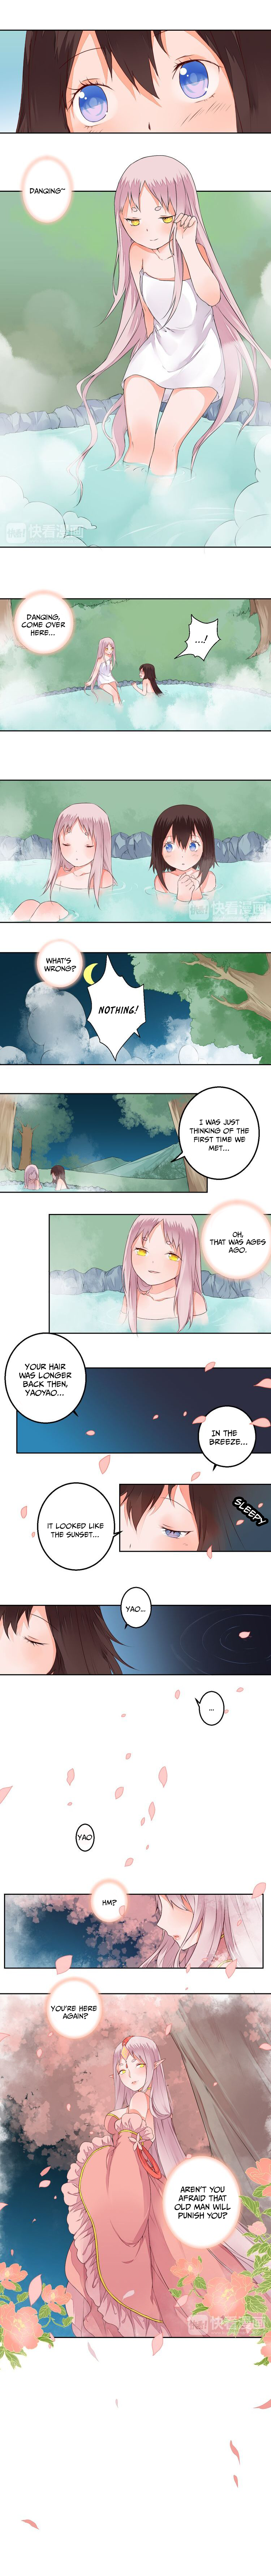 Peach Blossoms - Page 2